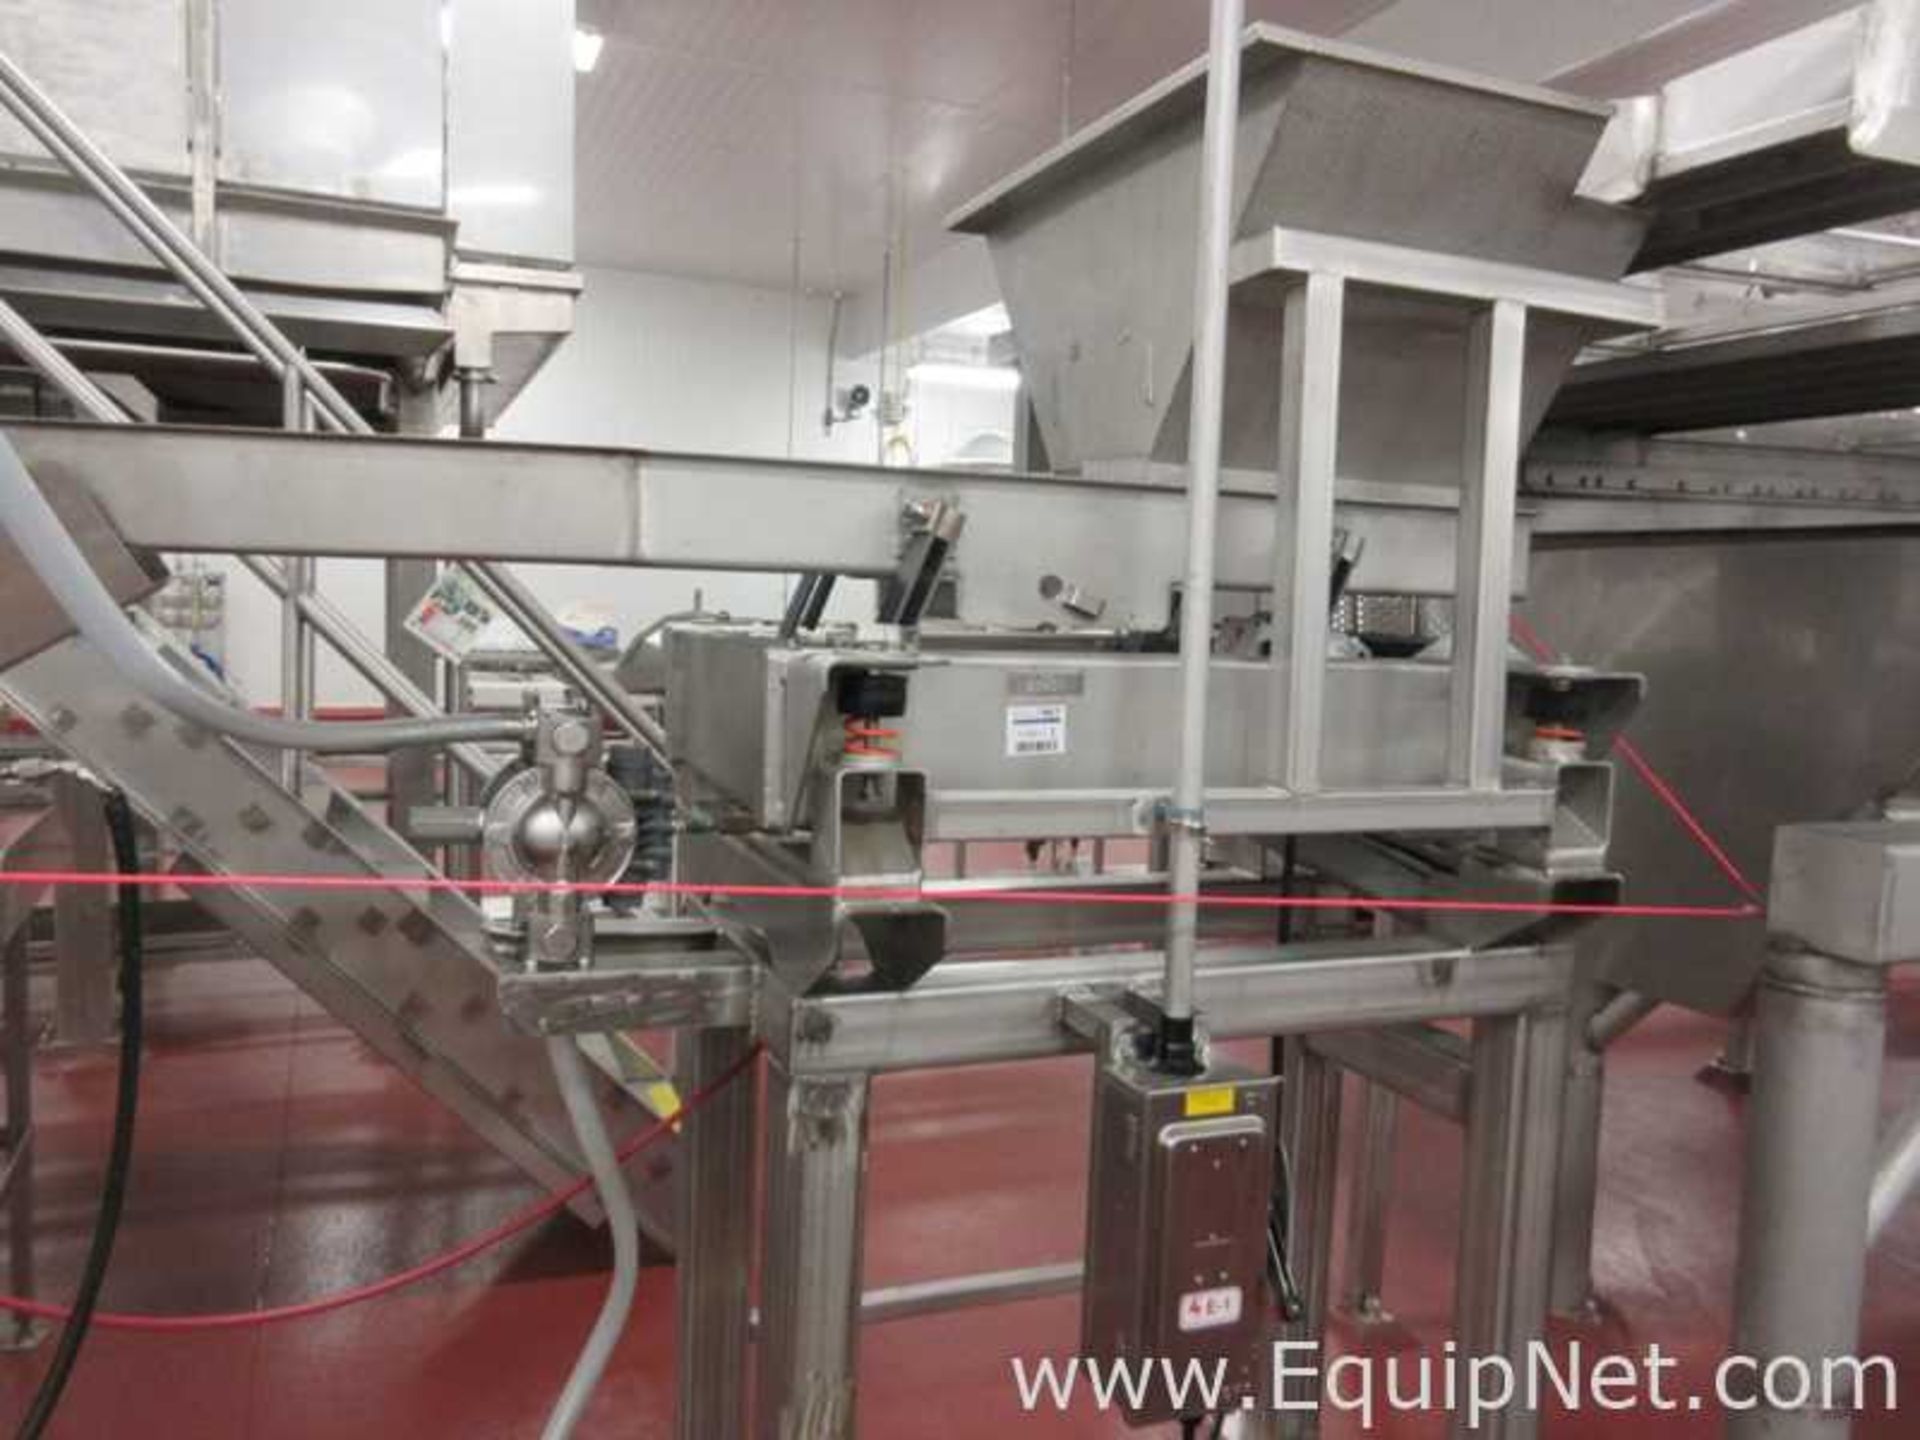 EQUIPNET LISTING #775988; REMOVAL COST: $6,890.00; DESCRIPTION: Key Technologies Scalping Sorting - Image 2 of 5